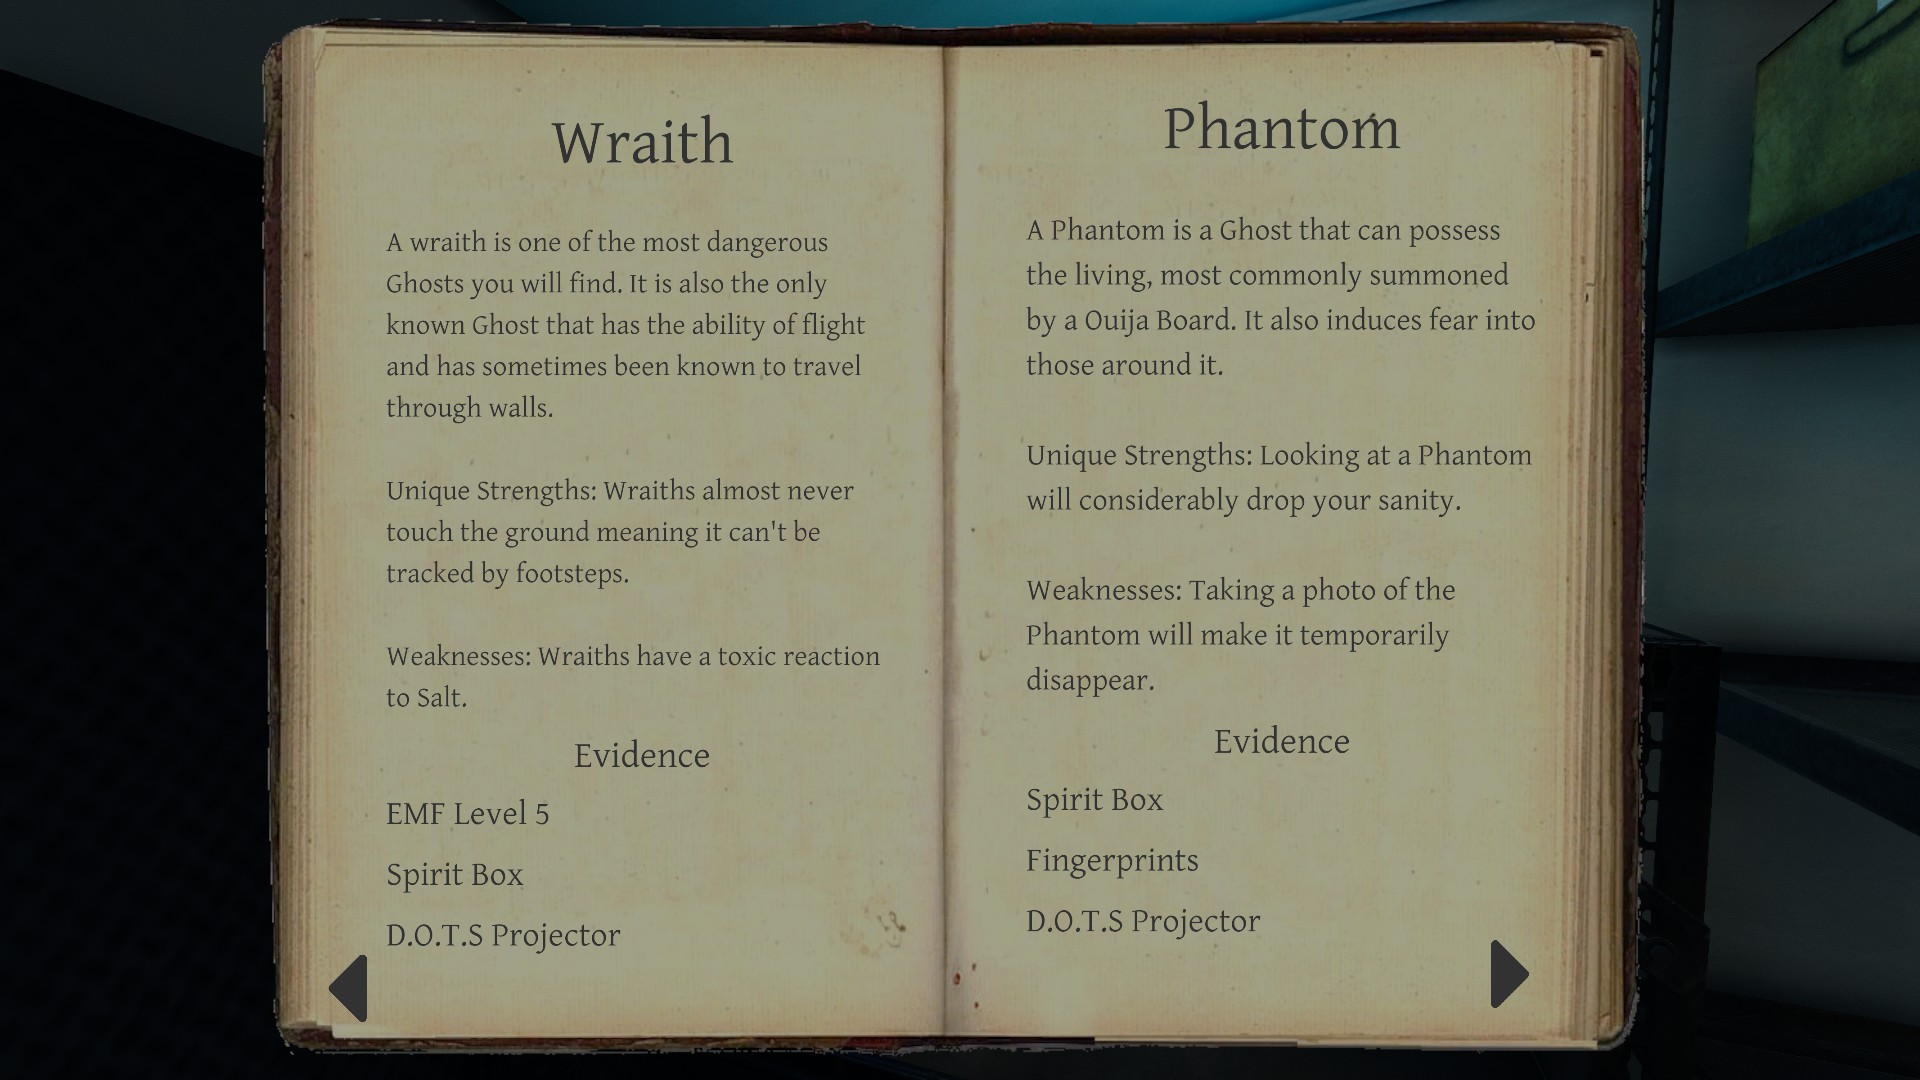 Phasmophobia List of New Ghosts in Game - All Evidence and Questions for Ghost Guide - Wraith - Phantom - BBDE783